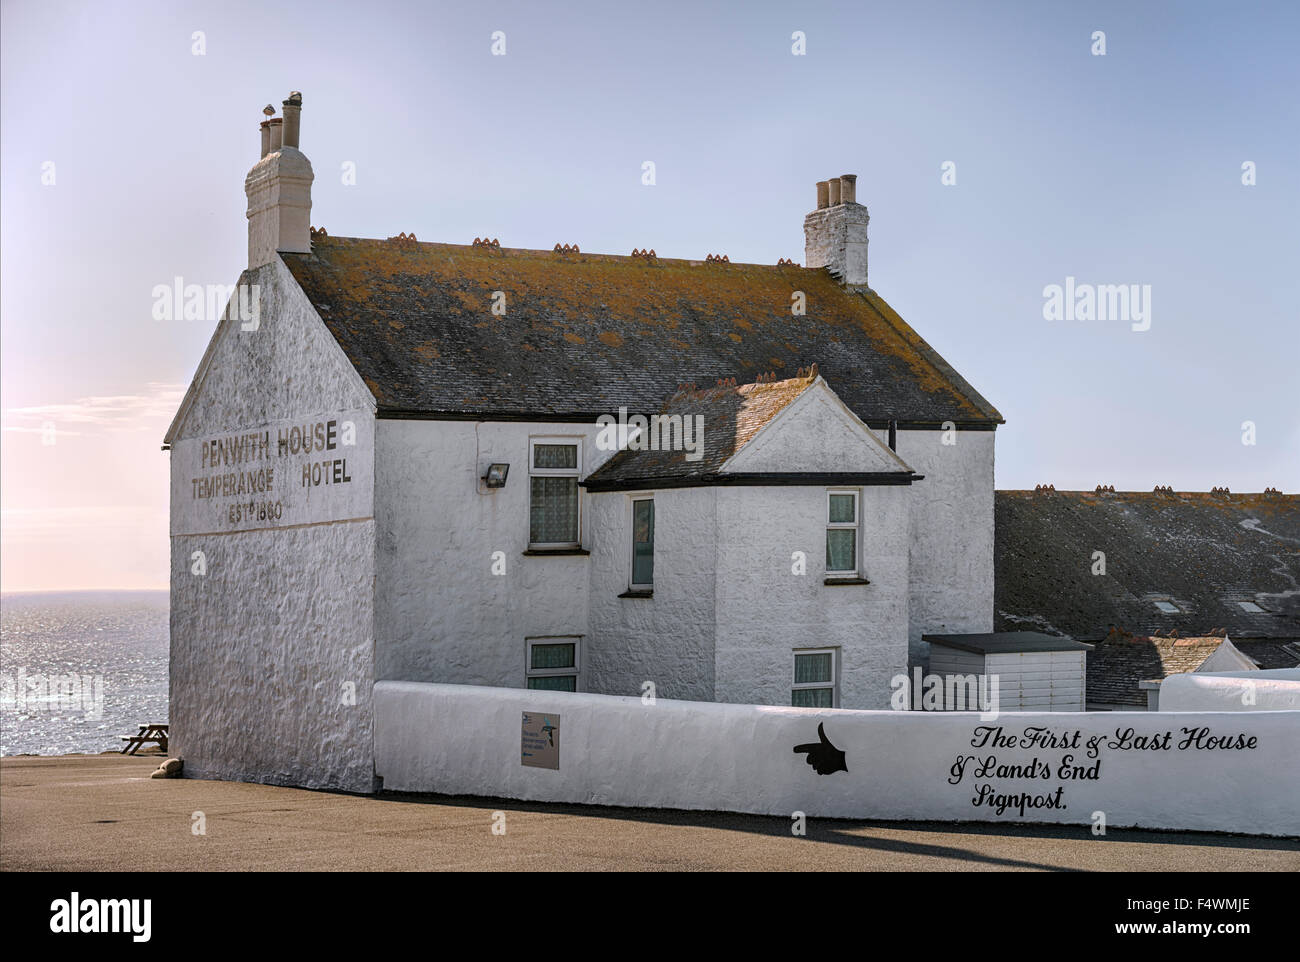 Penwith House, First and Last Guesthouse at Lands End, Cornwall, England, UK Stock Photo